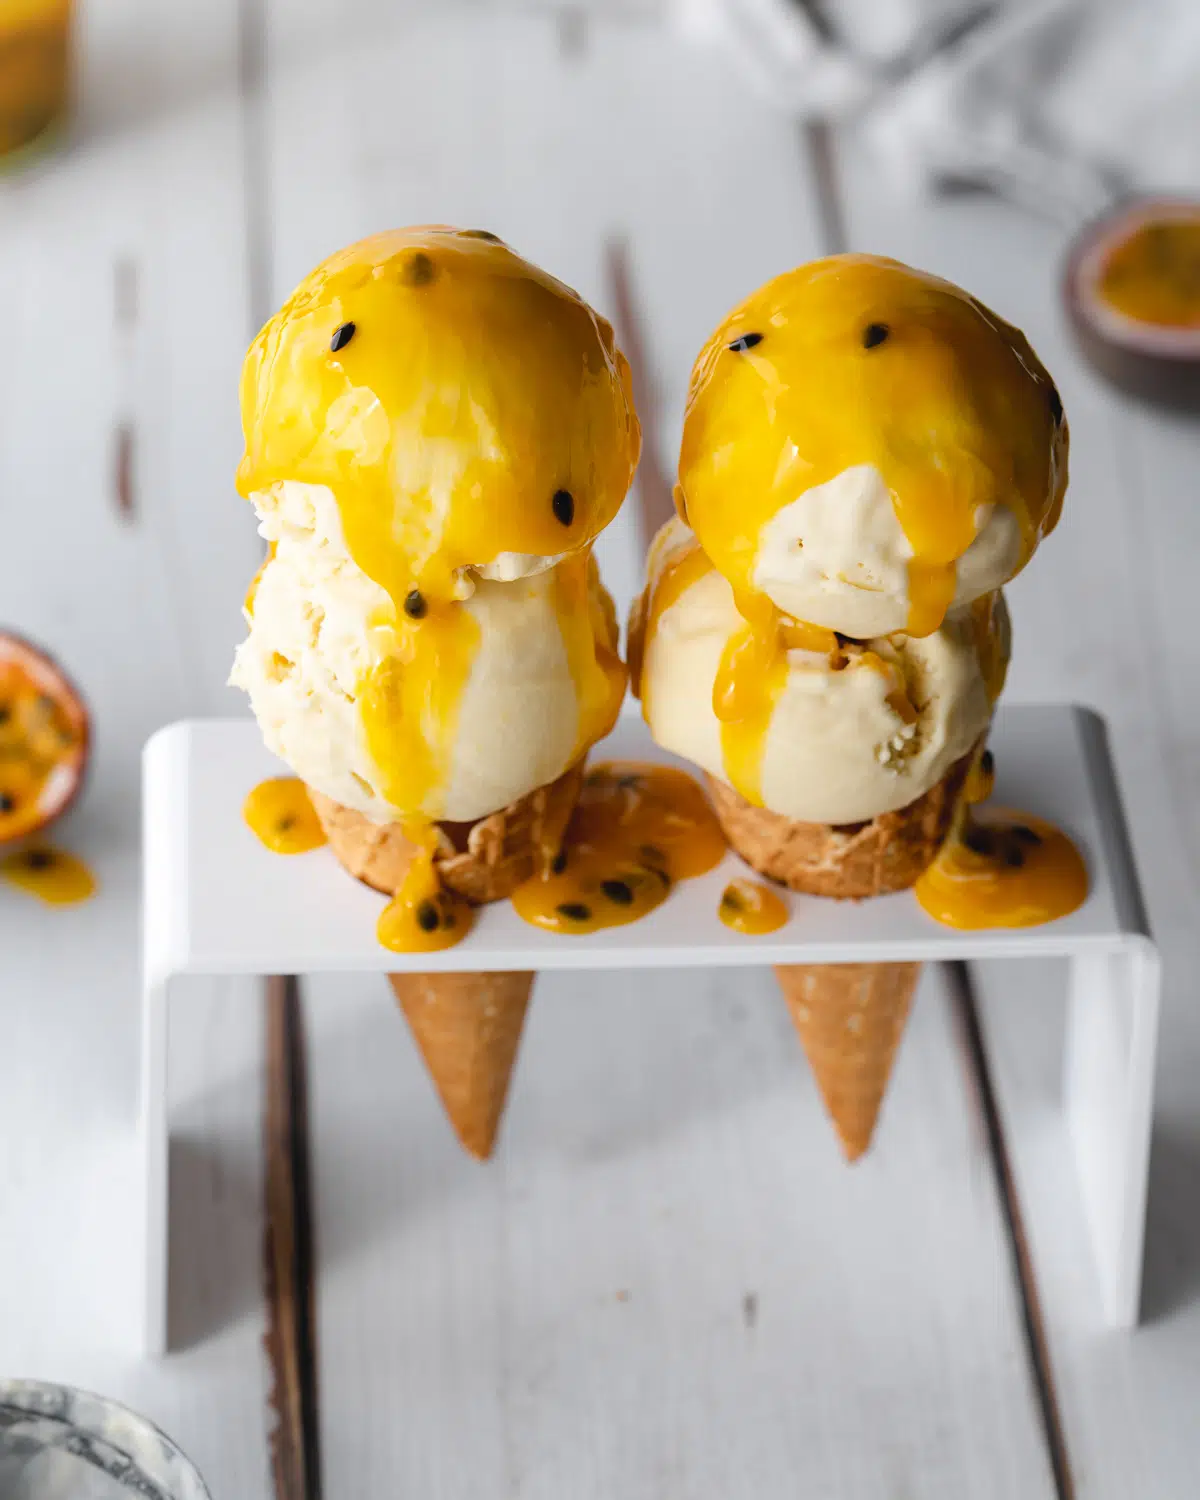 2 passion fruit ice cream cones with passionfruit coulis on a wooden white surface.